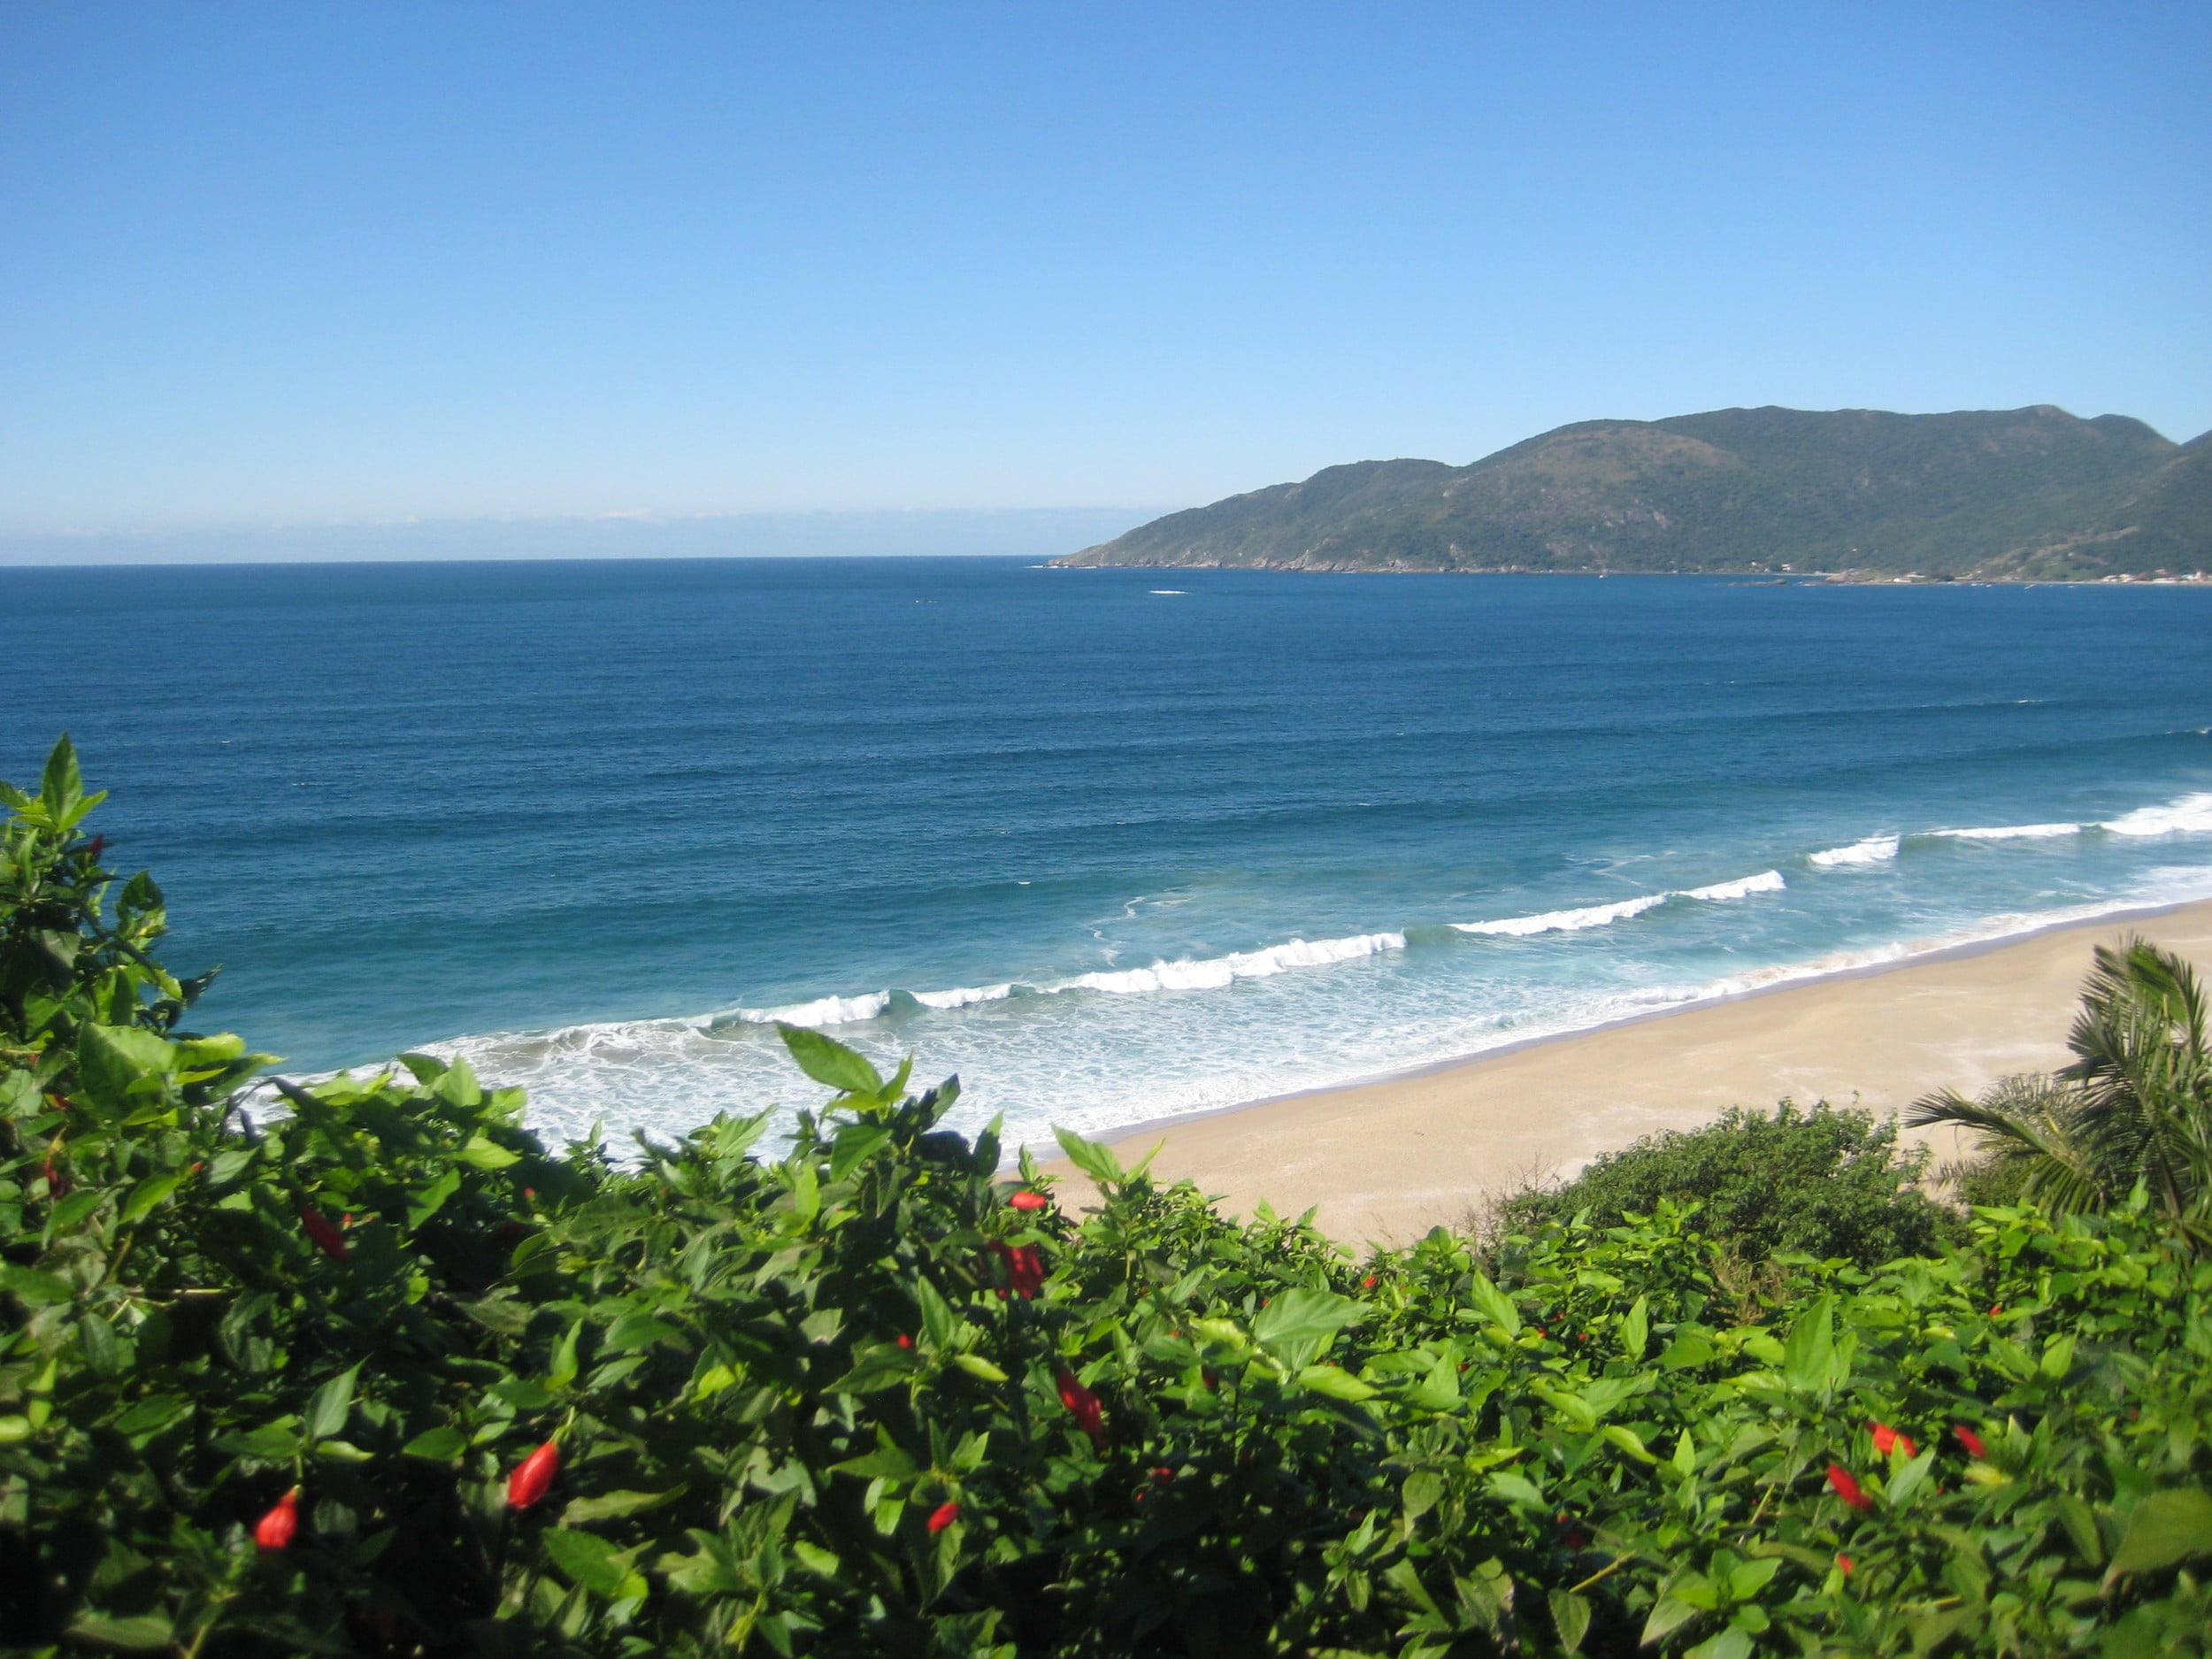  I love clean beaches, don't you? Let's keep them beautiful and take care of the wildlife. Florianopolis, Brasil 